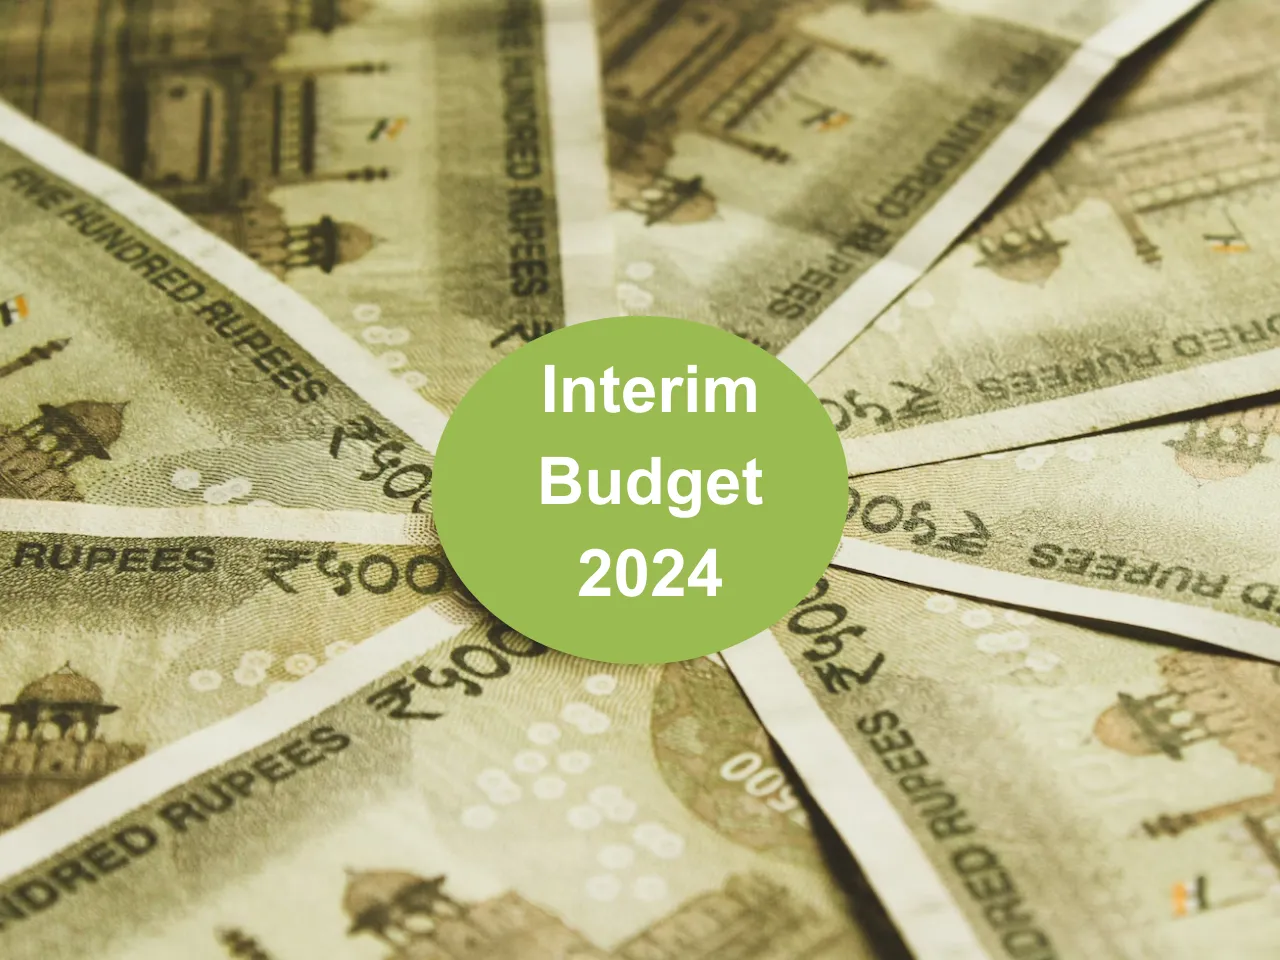 Advertising and marketing industry welcomes interim budget 2024-25